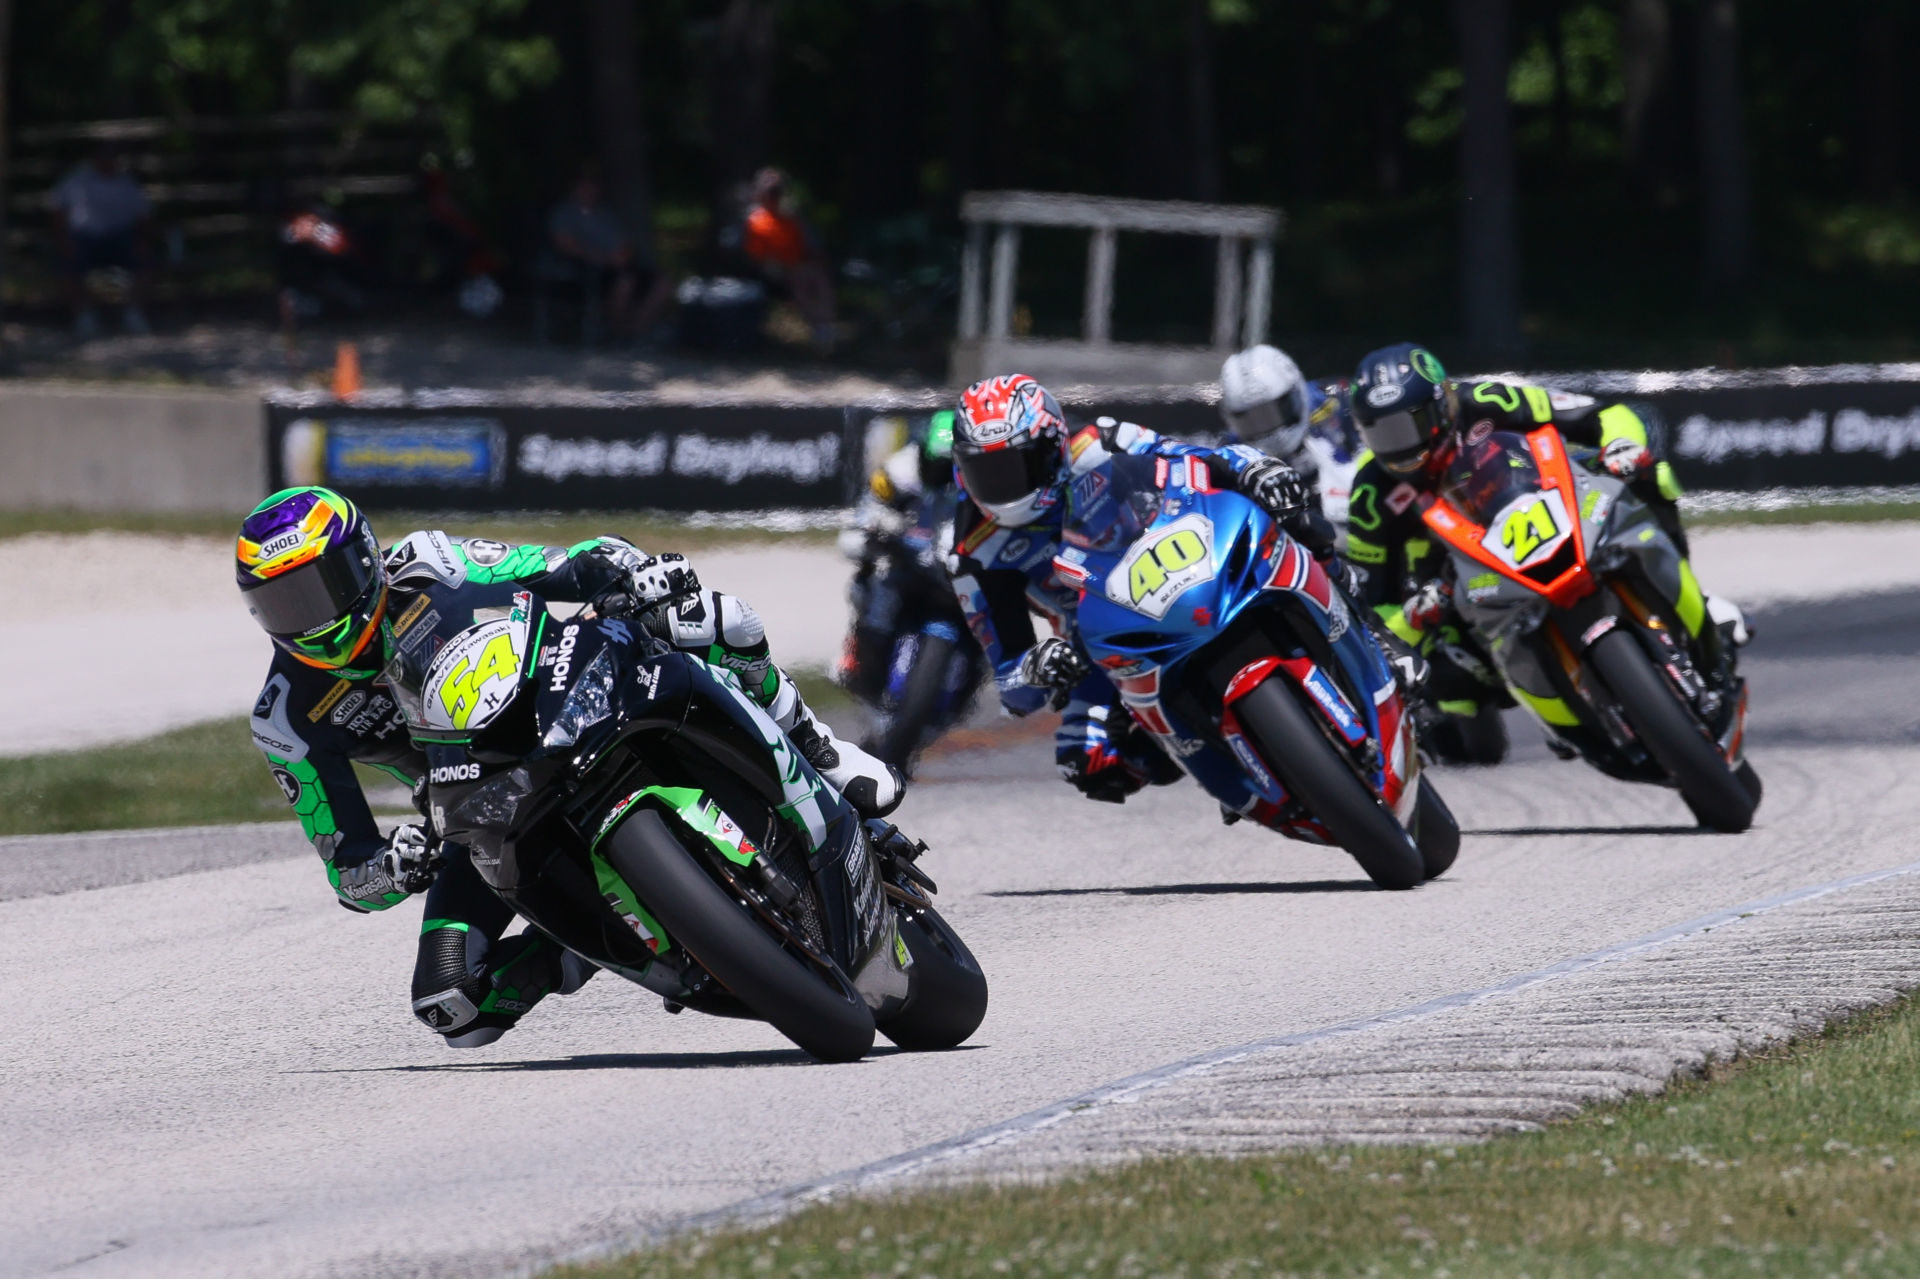 Richie Escalante (54) leads Sean Dylan Kelly (40), Brandon Paasch (21) and the rest of the field during MotoAmerica Supersport Race 2 at Road America. Photo by Brian J. Nelson, courtesy MotoAmerica.